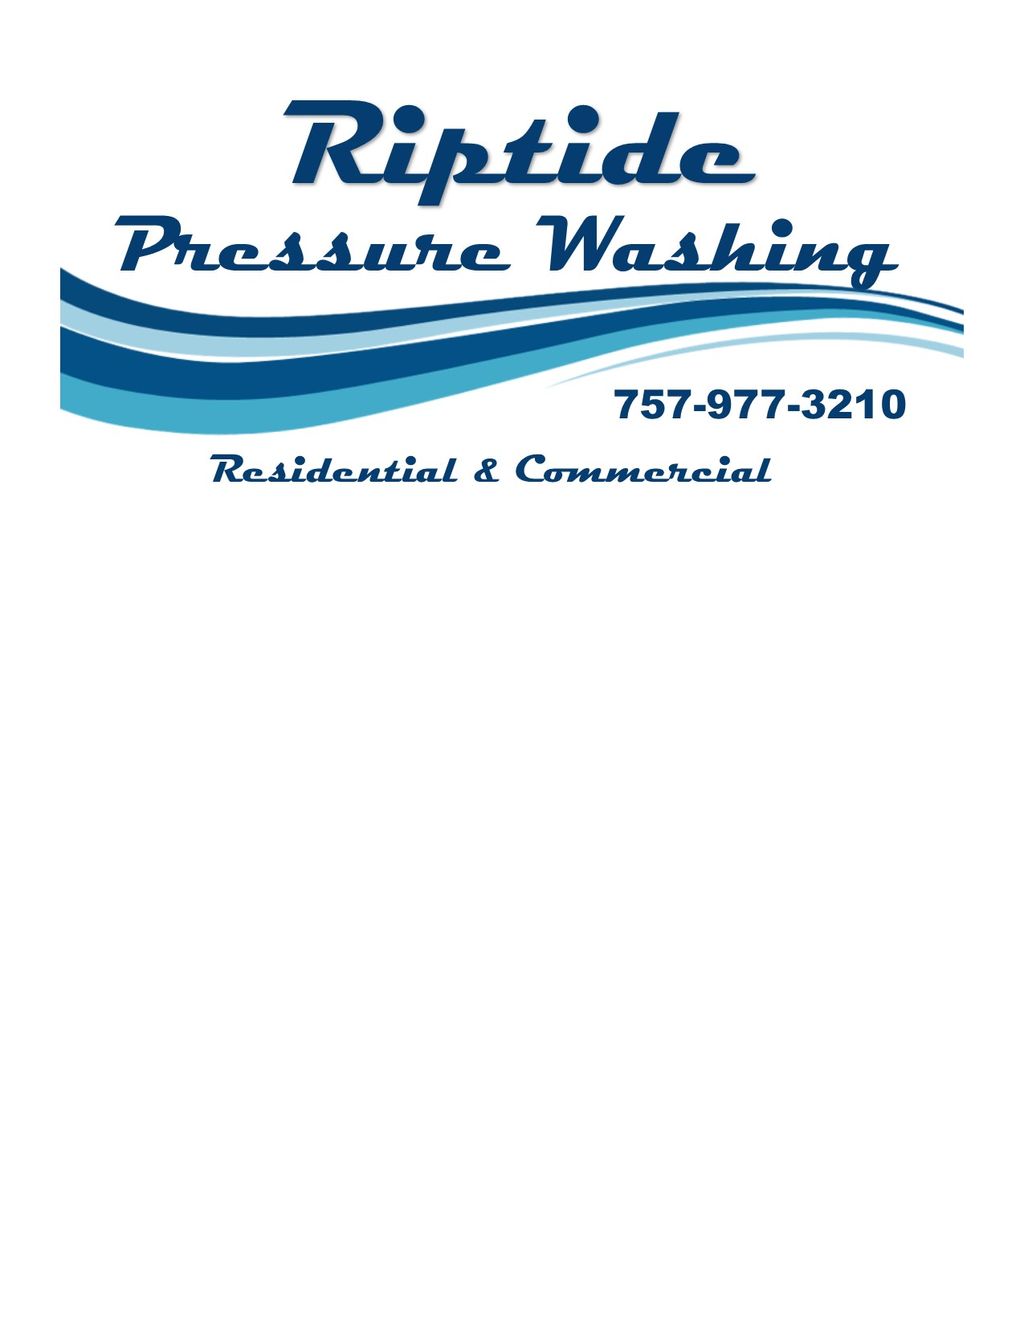 Riptide Pressure Washing & Cleaning Services